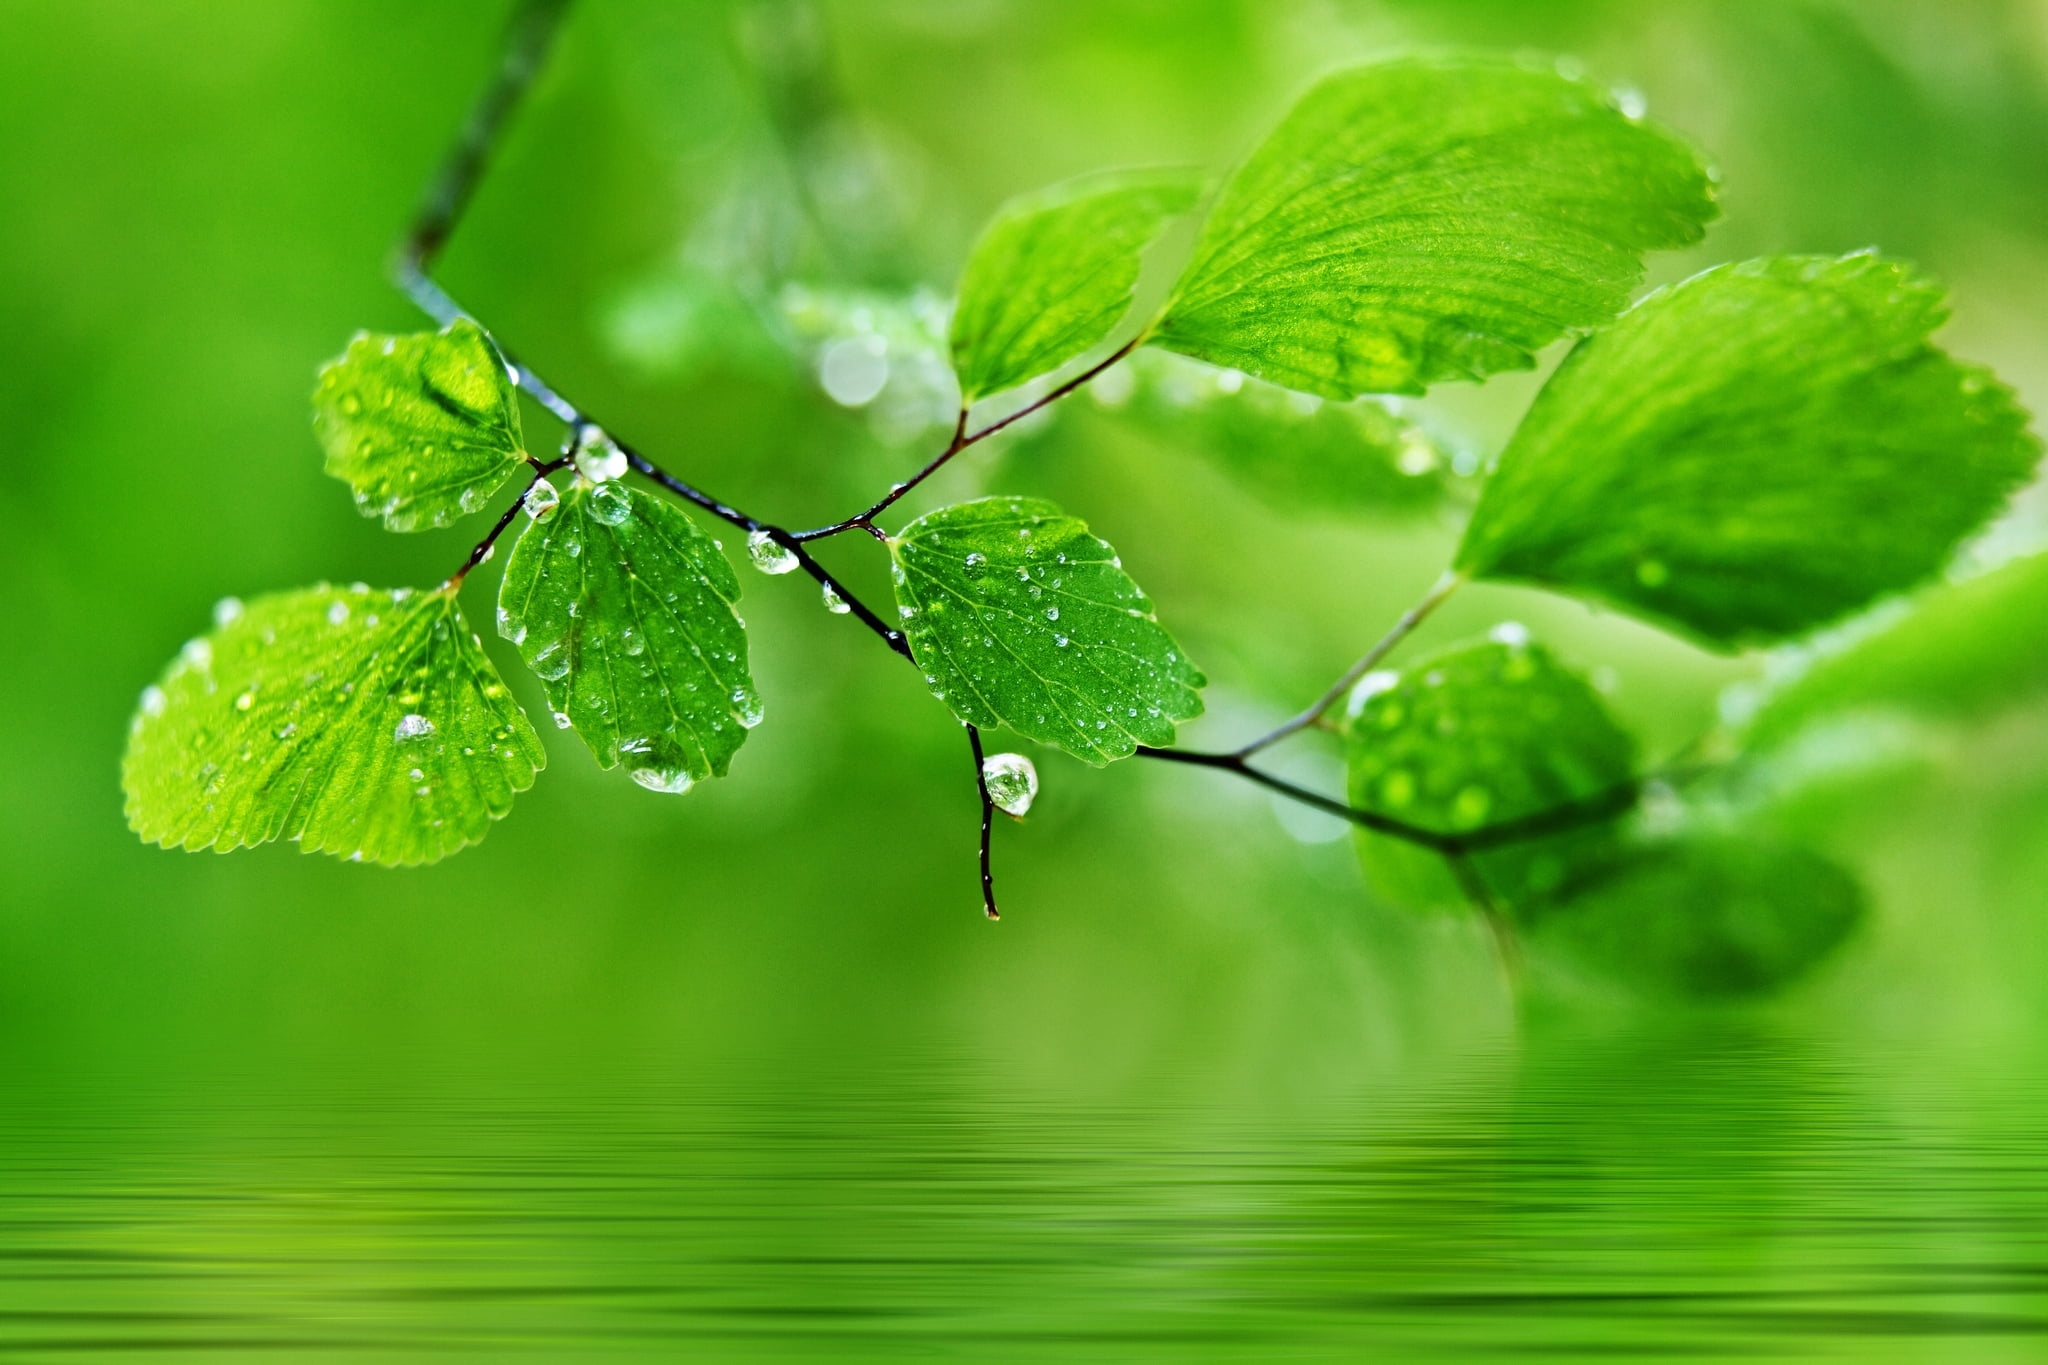 green leaves with water dew in selected focus photography